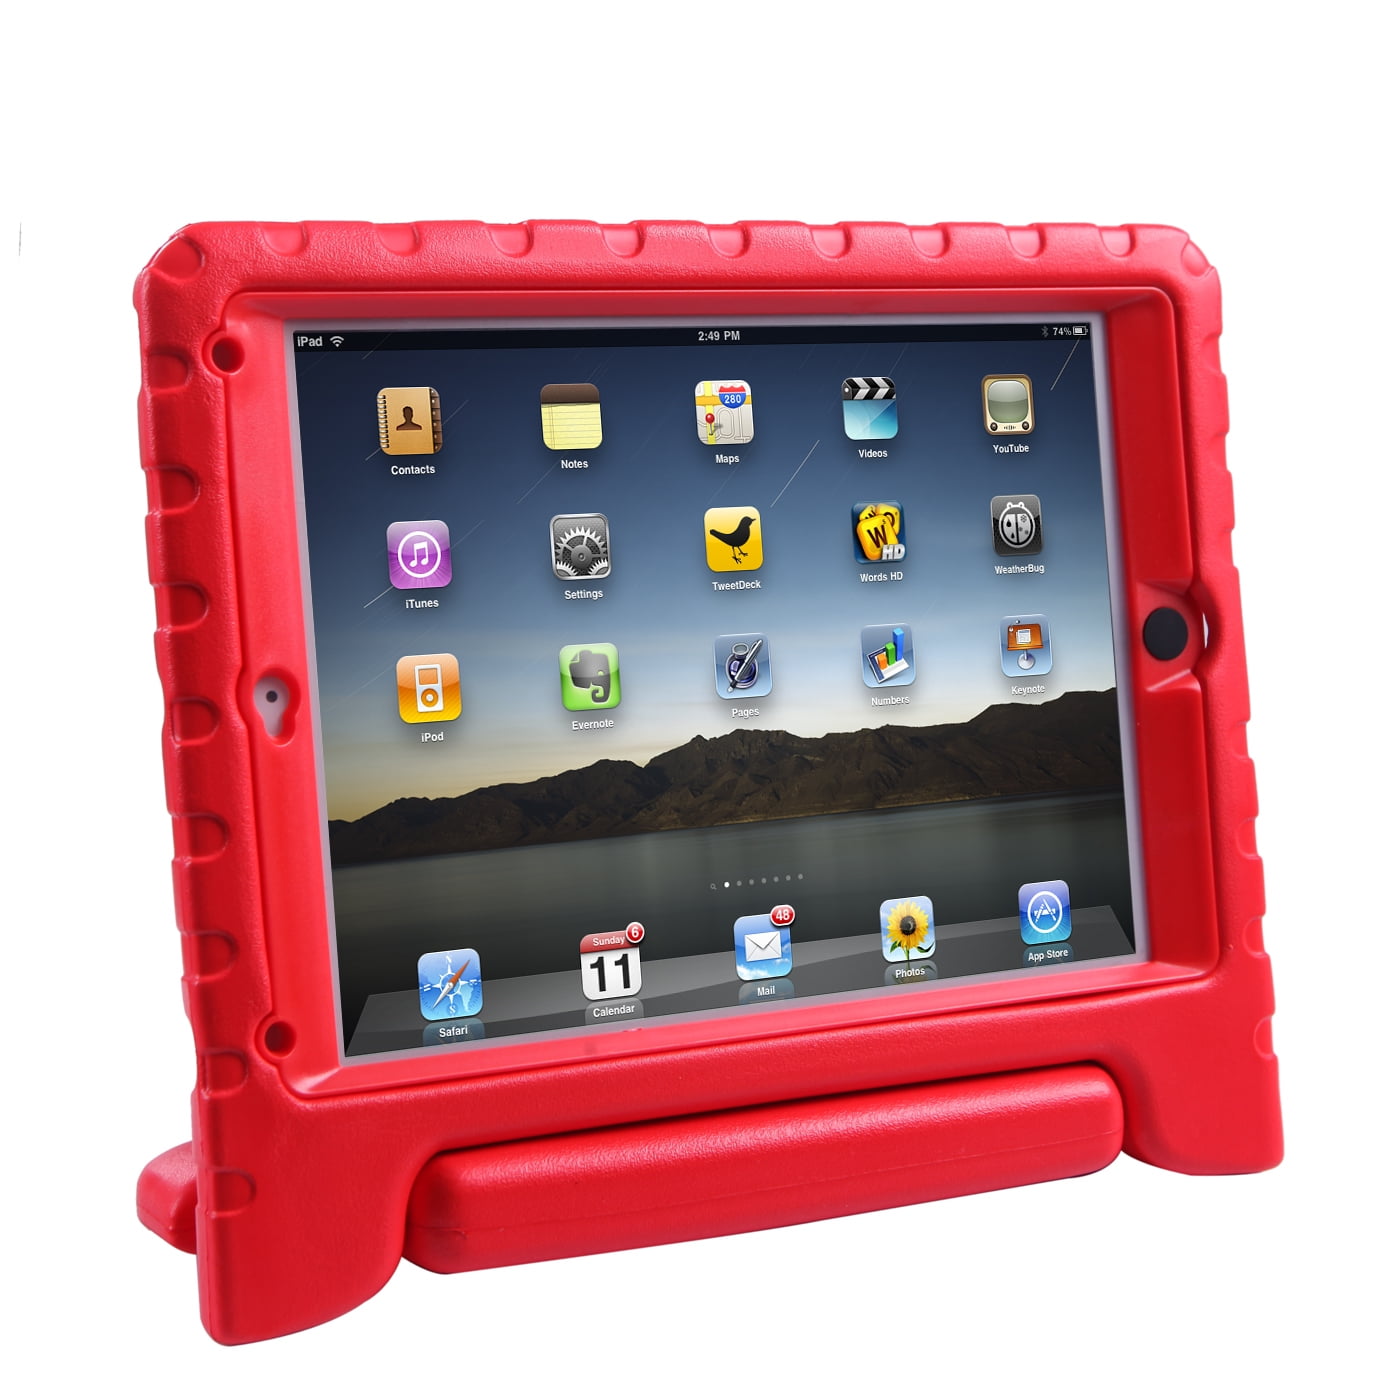 HDE iPad Air Bumper Case for Kids Shockproof Hard Cover Handle Stand with  Built in Screen Protector for Apple iPad Air 1 (Red)